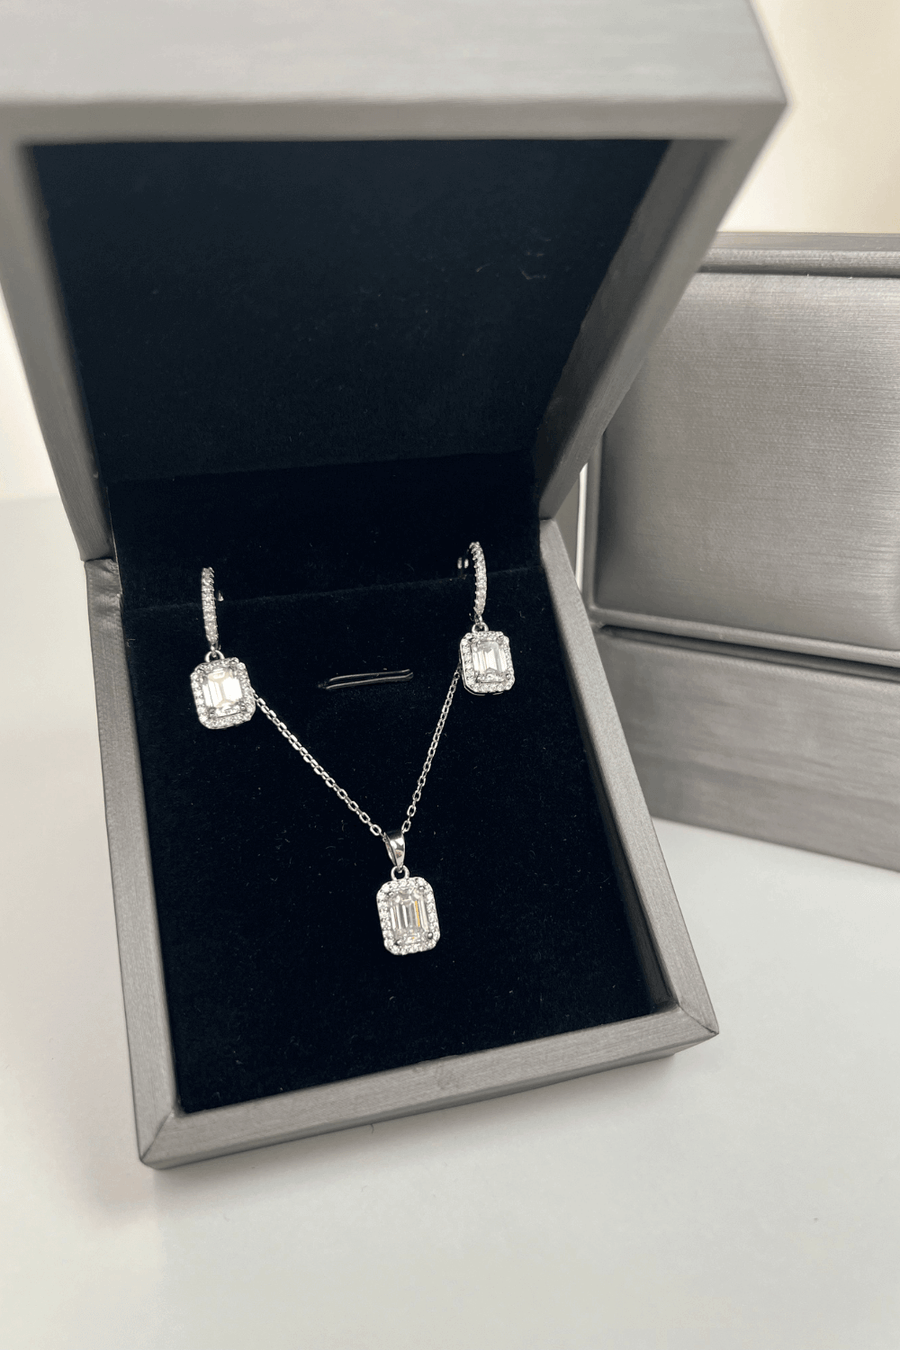 Best Diamond Jewelry Bundle Set Gift | Best Radiant Diamond Necklace, Earrings Jewelry Gift for Women, Mother, Wife, Daughter | MASON New York